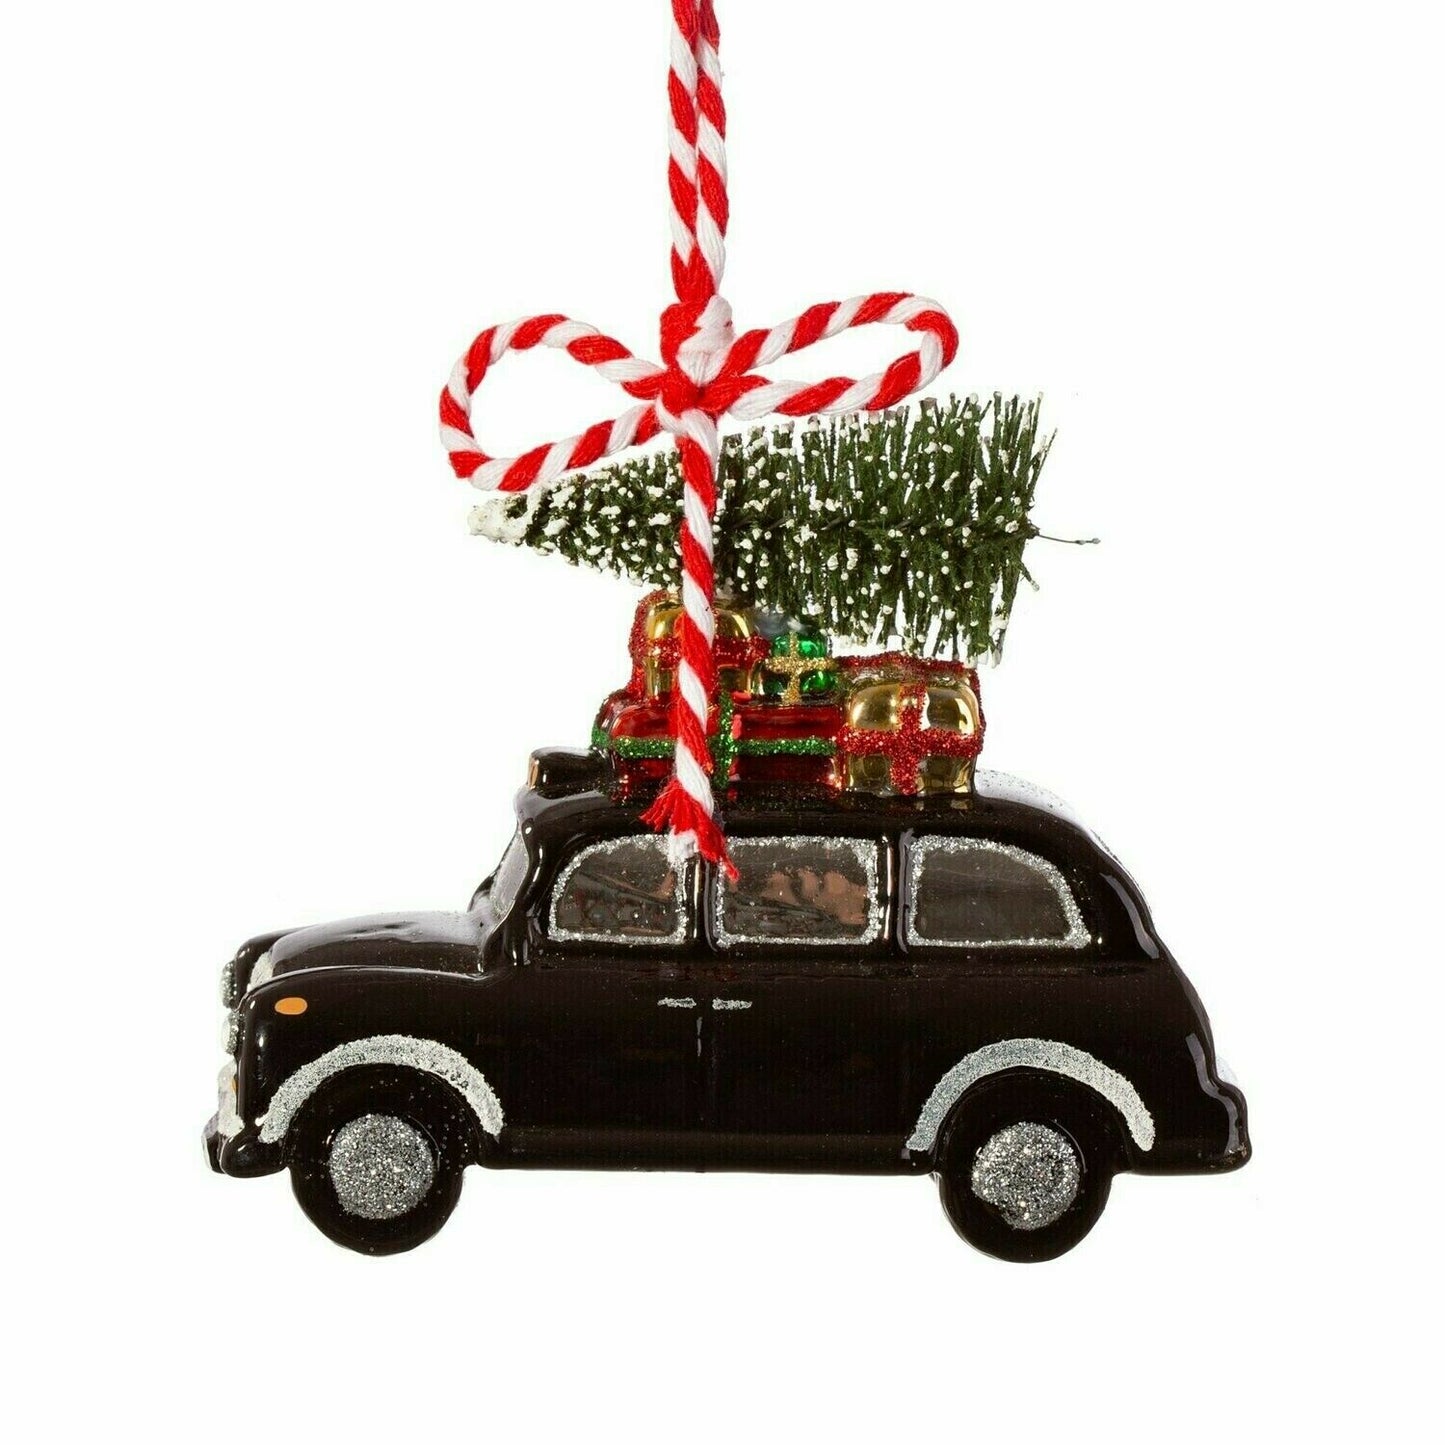 Bring a touch of the big city to the tree with this very cool London black cab carrying a Christmas tree.